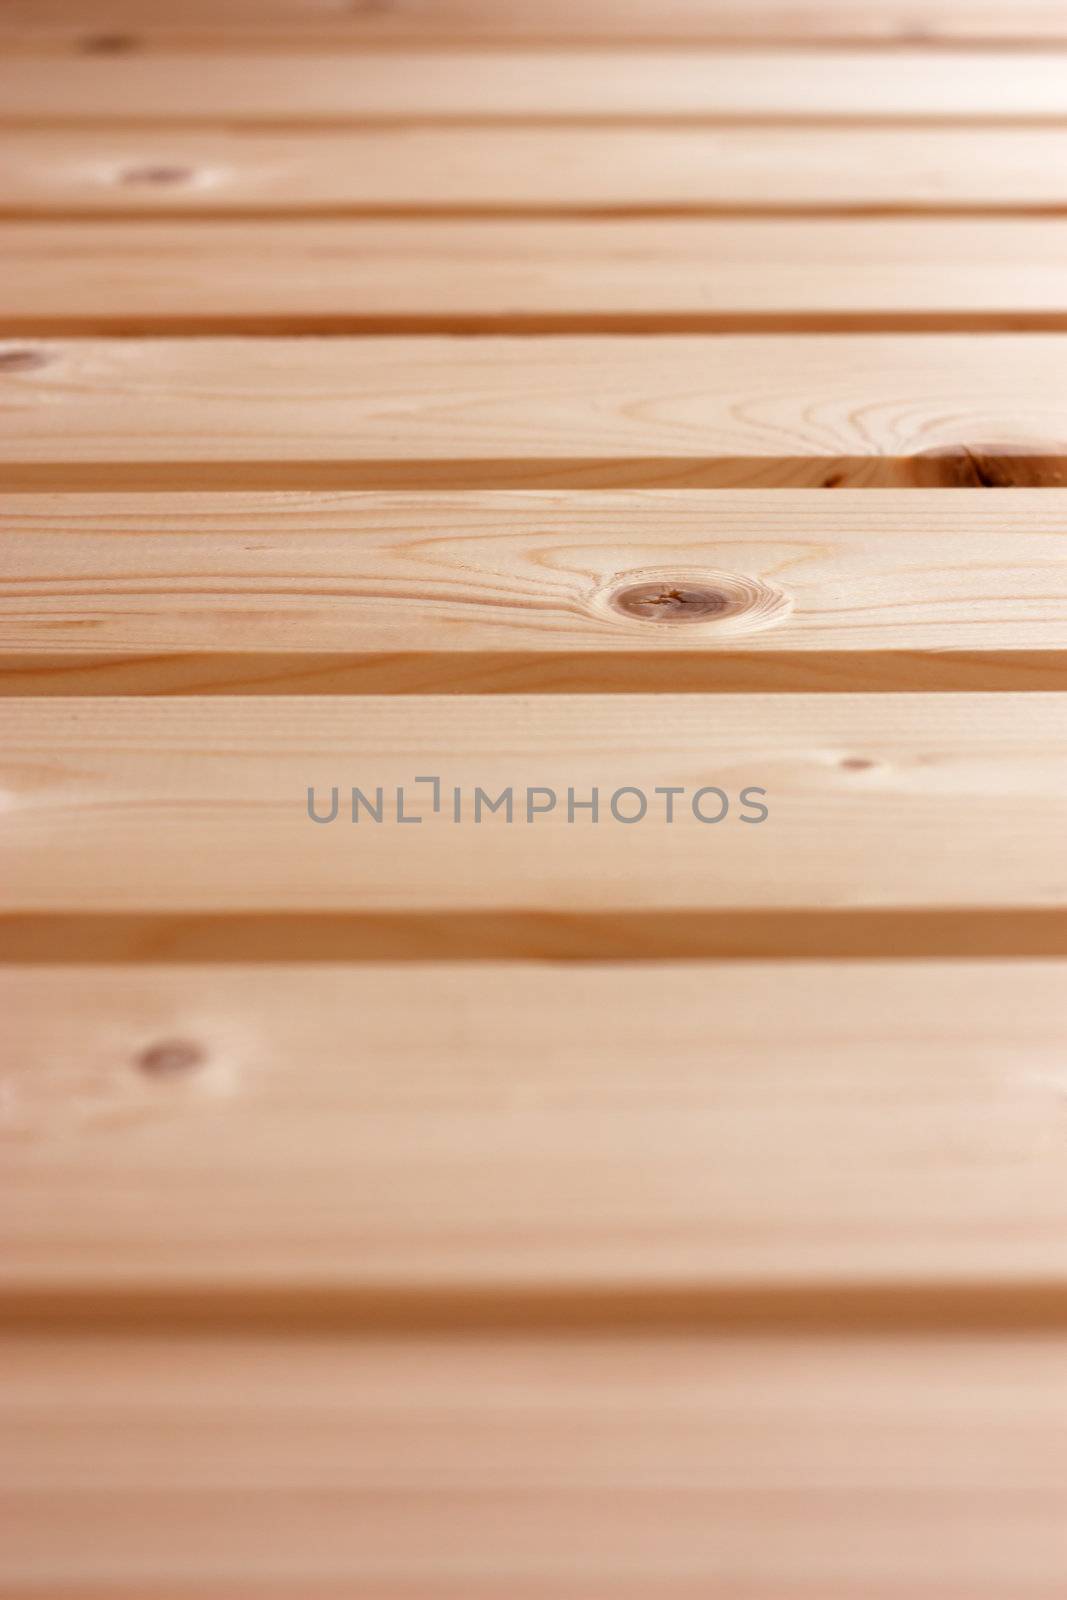 Wood planks by AGorohov